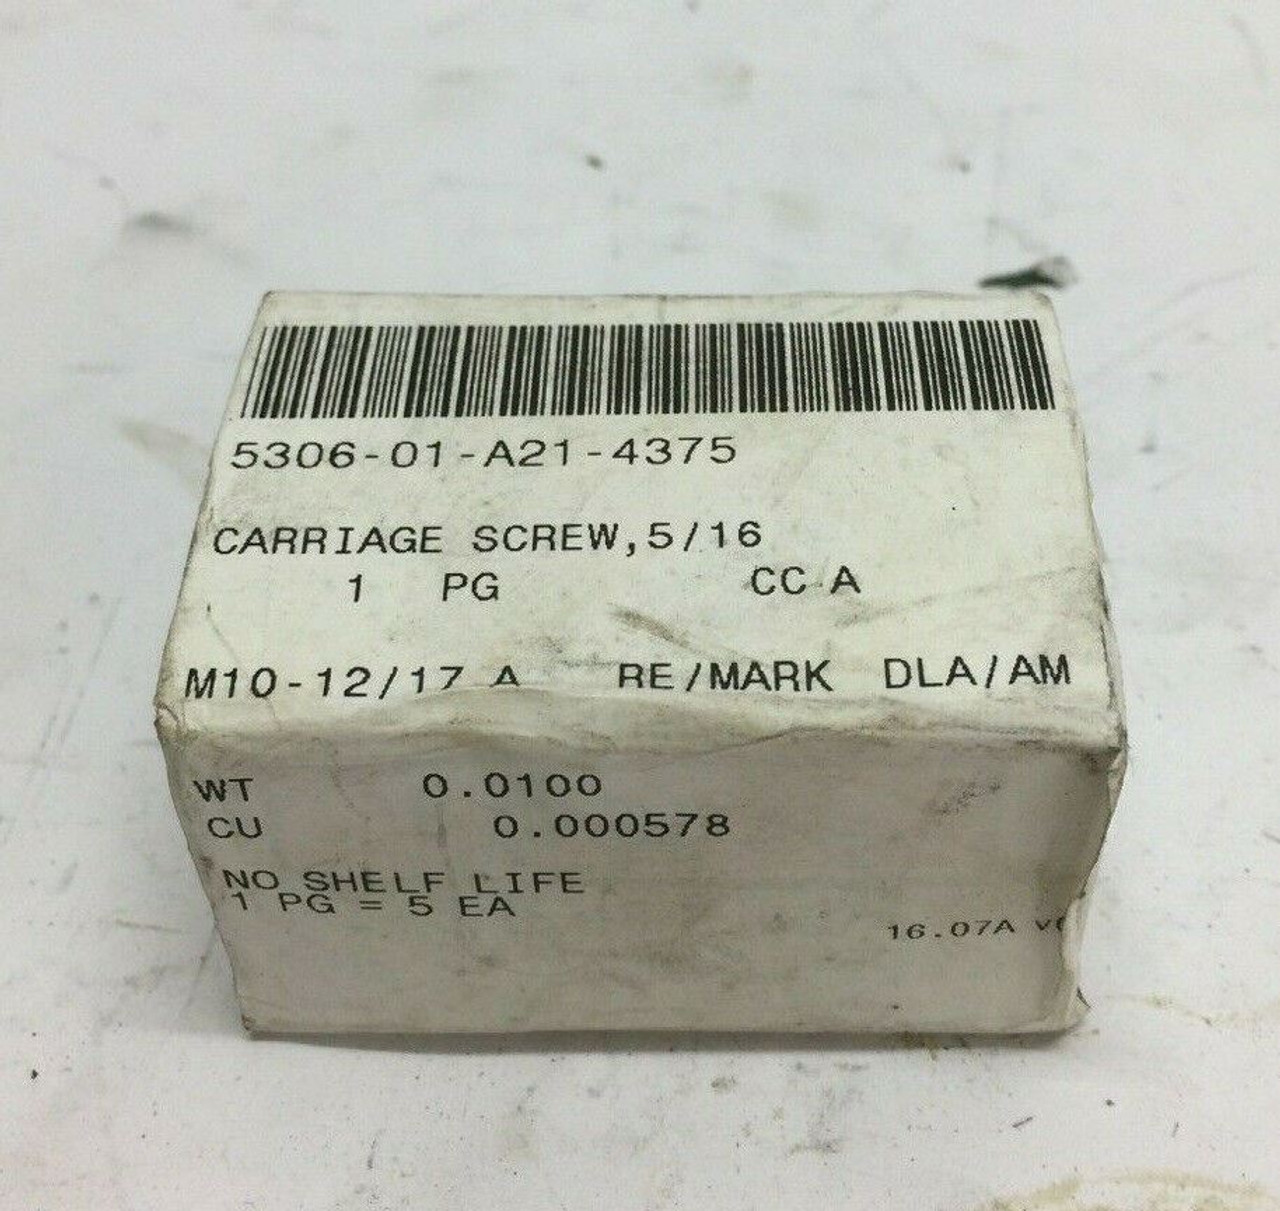 5/16 Carriage Screw 5306-01-A21-4375 Lot of 5